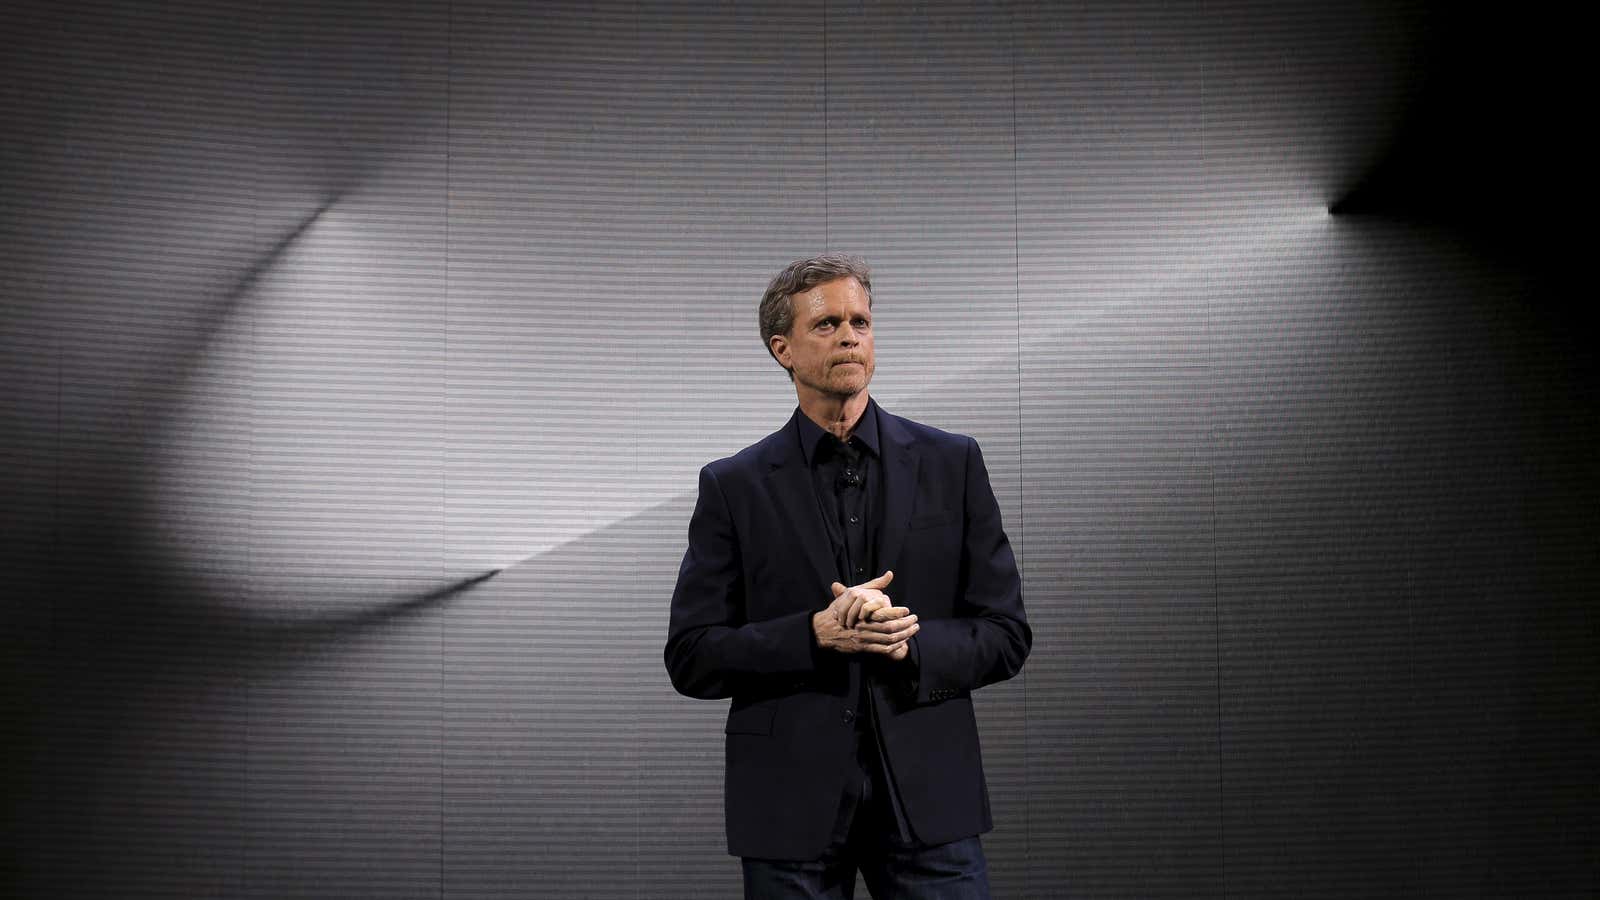 That swoosh behind Nike CEO Mark Parker is looking a little shady.